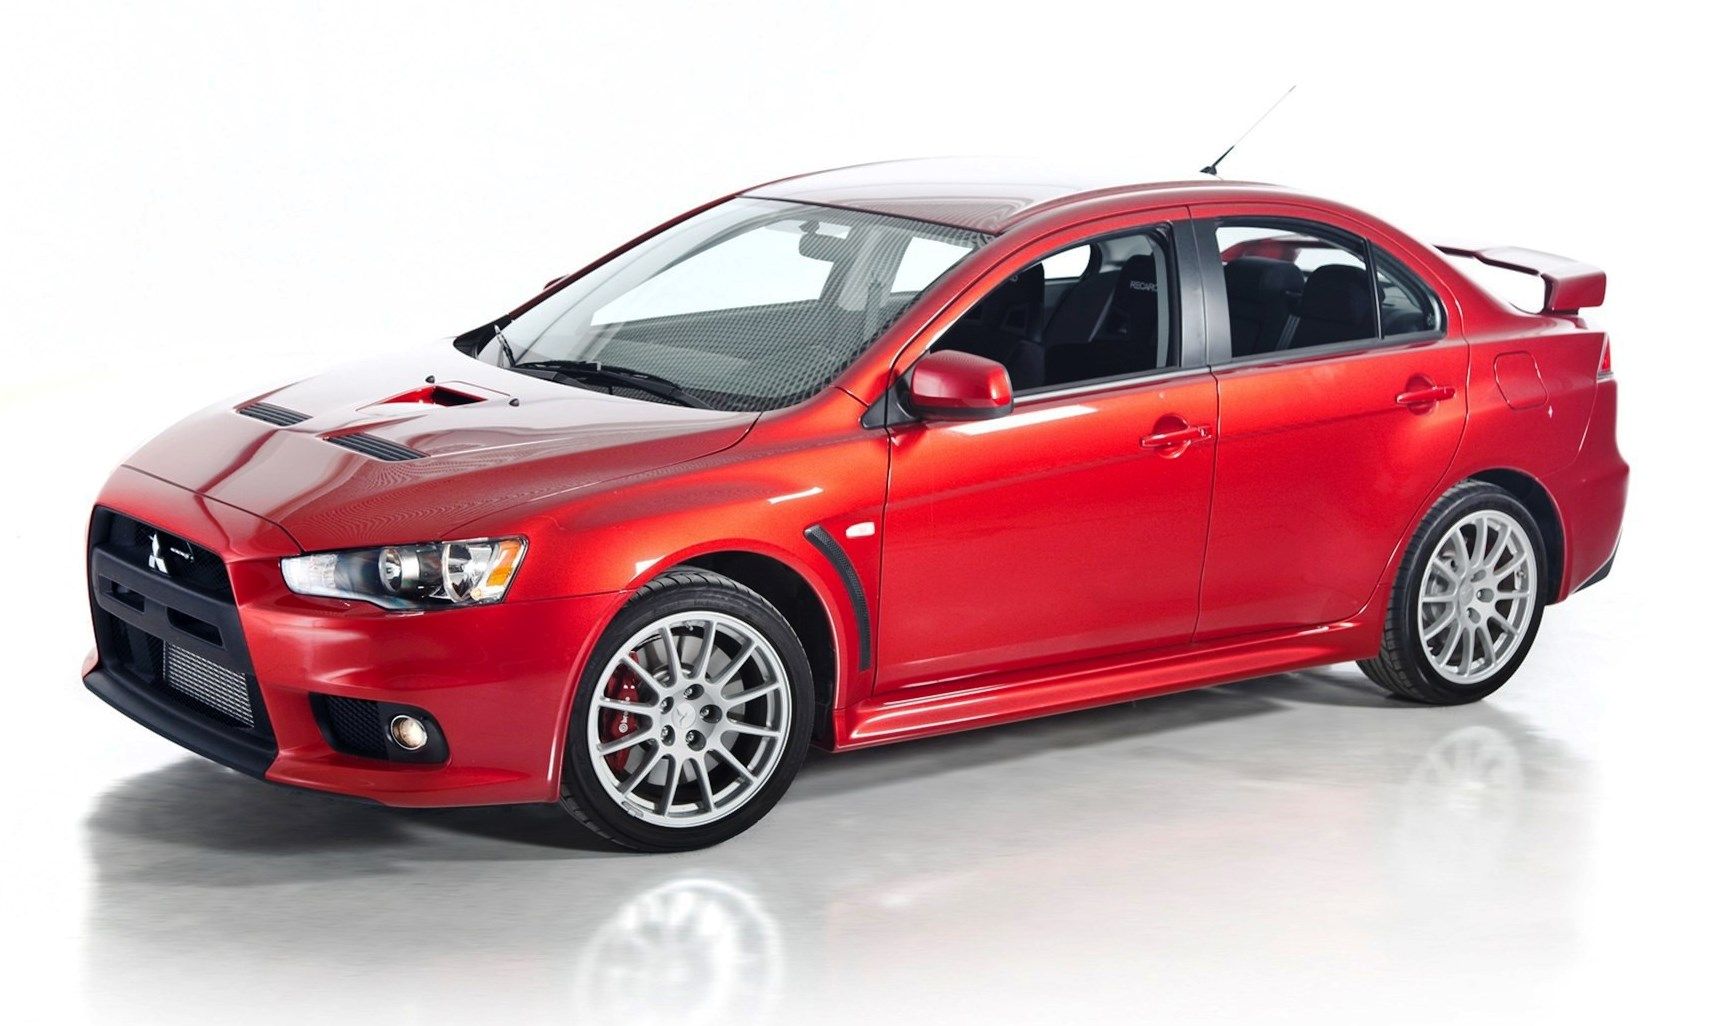 2014 Mitsubishi Ending the Lancer Evo's Production With a 